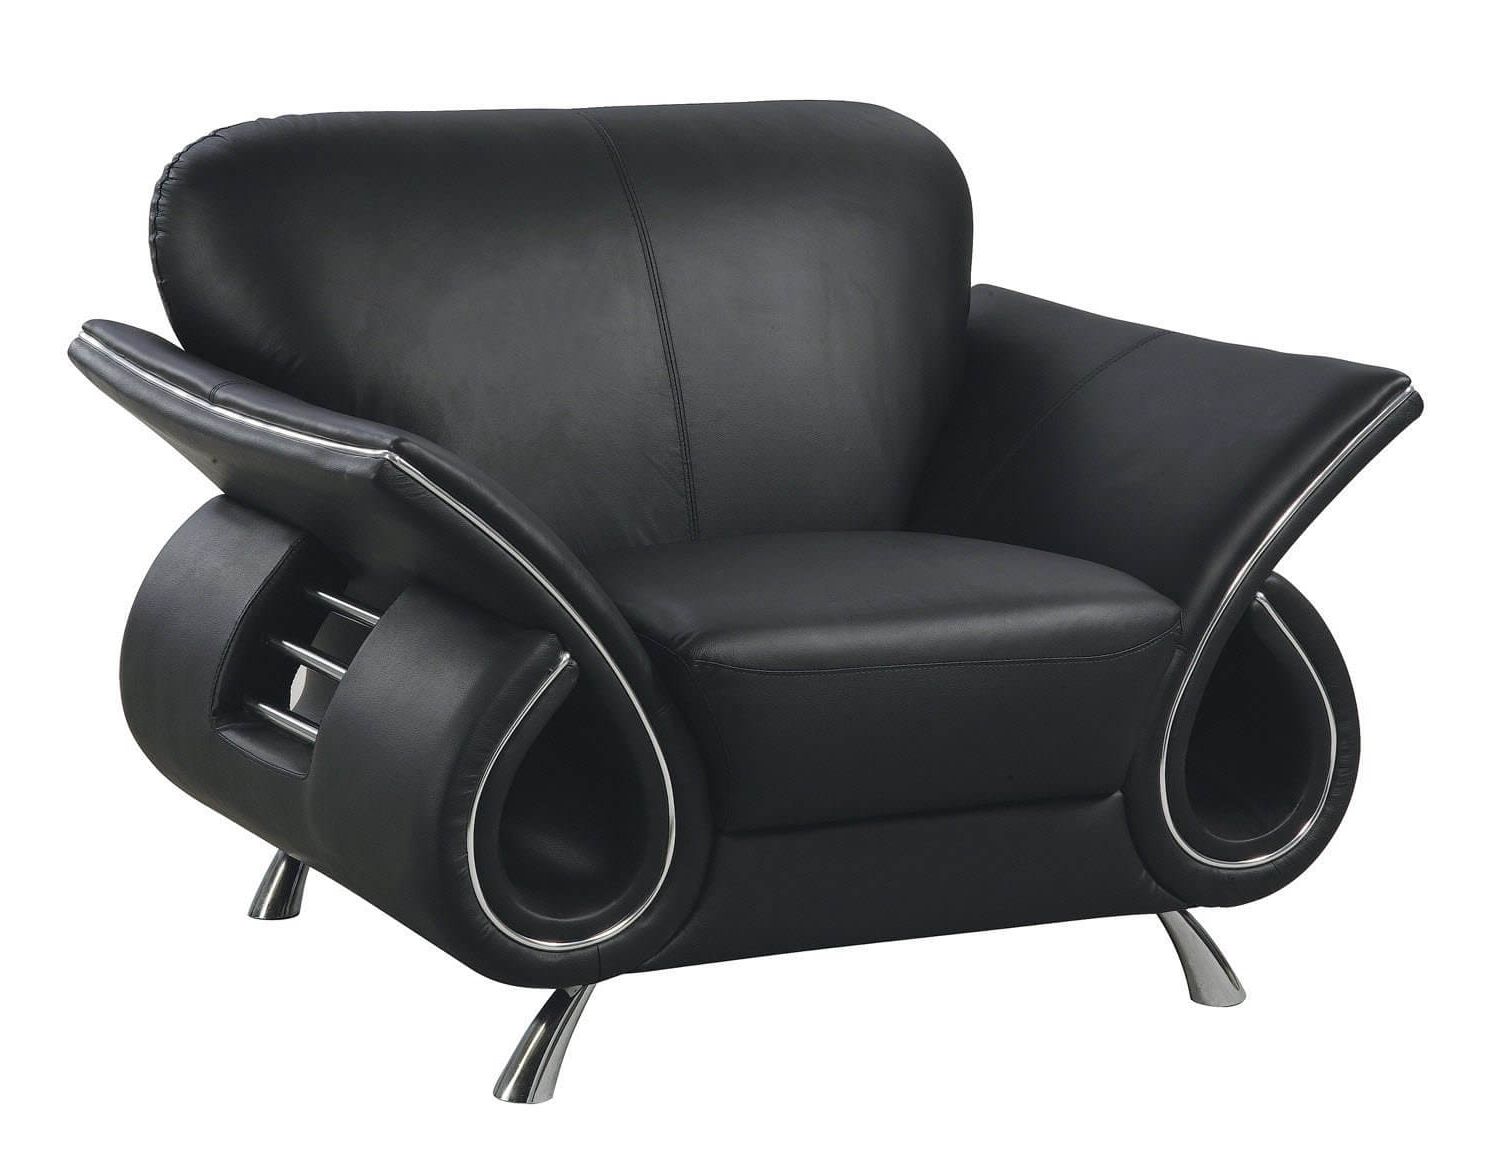 Extra Wide Recliner Lounge Chairs Pertaining To Popular 25 Best Man Cave Chairs (View 4 of 25)